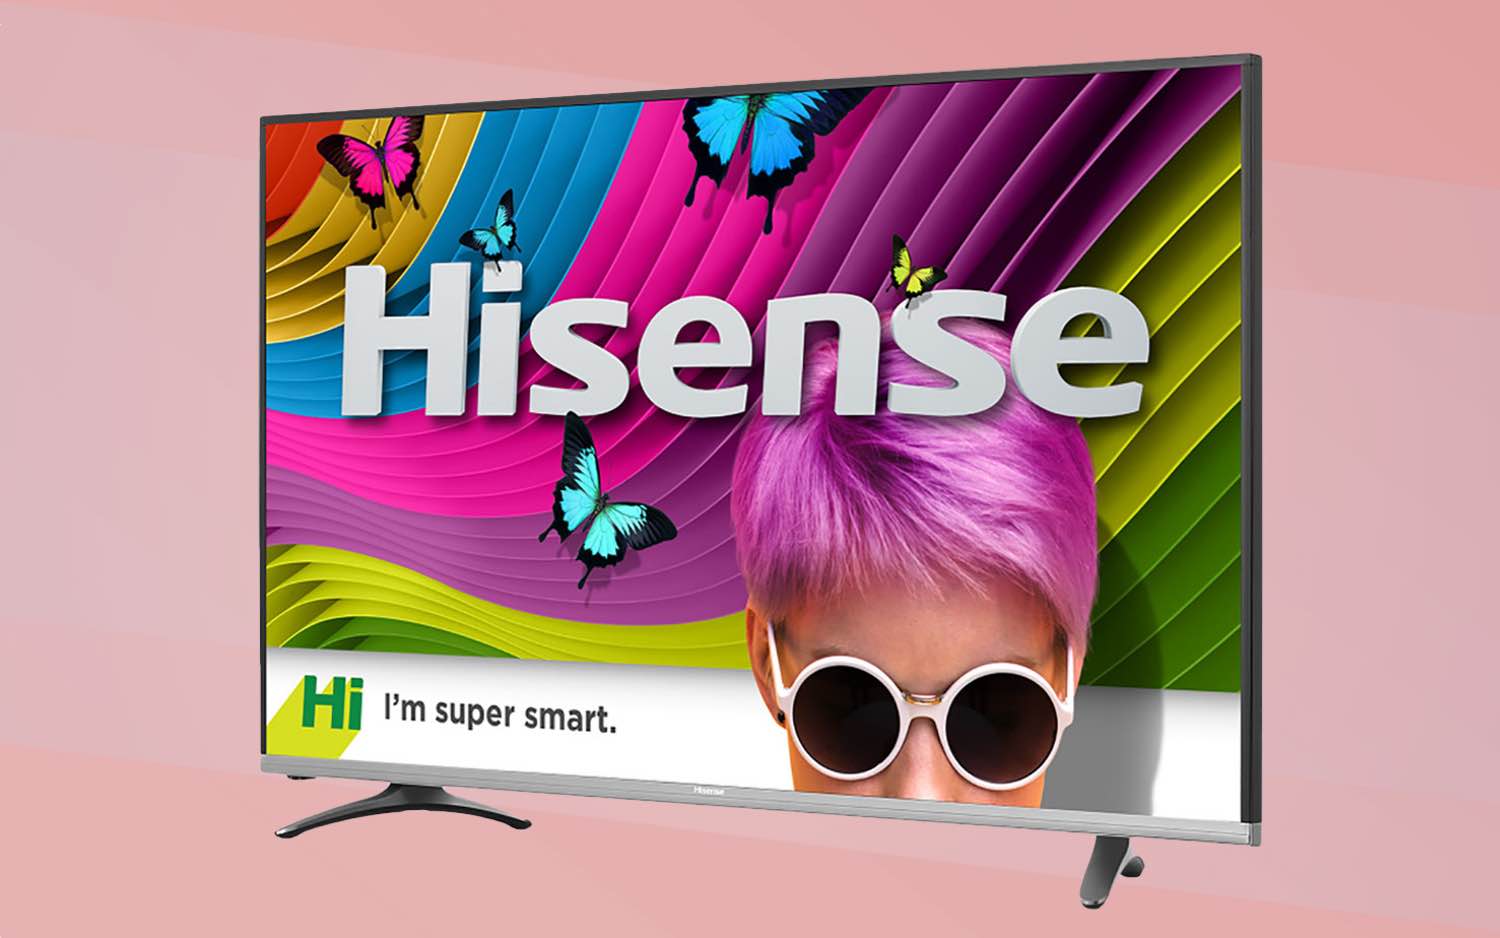 Hisense 43E77HQTUK QLED Gaming Series 43-inch 4K UHD Dolby Vision HDR Smart  TV with , Netflix, Disney + Freeview Play and Alexa Built-in